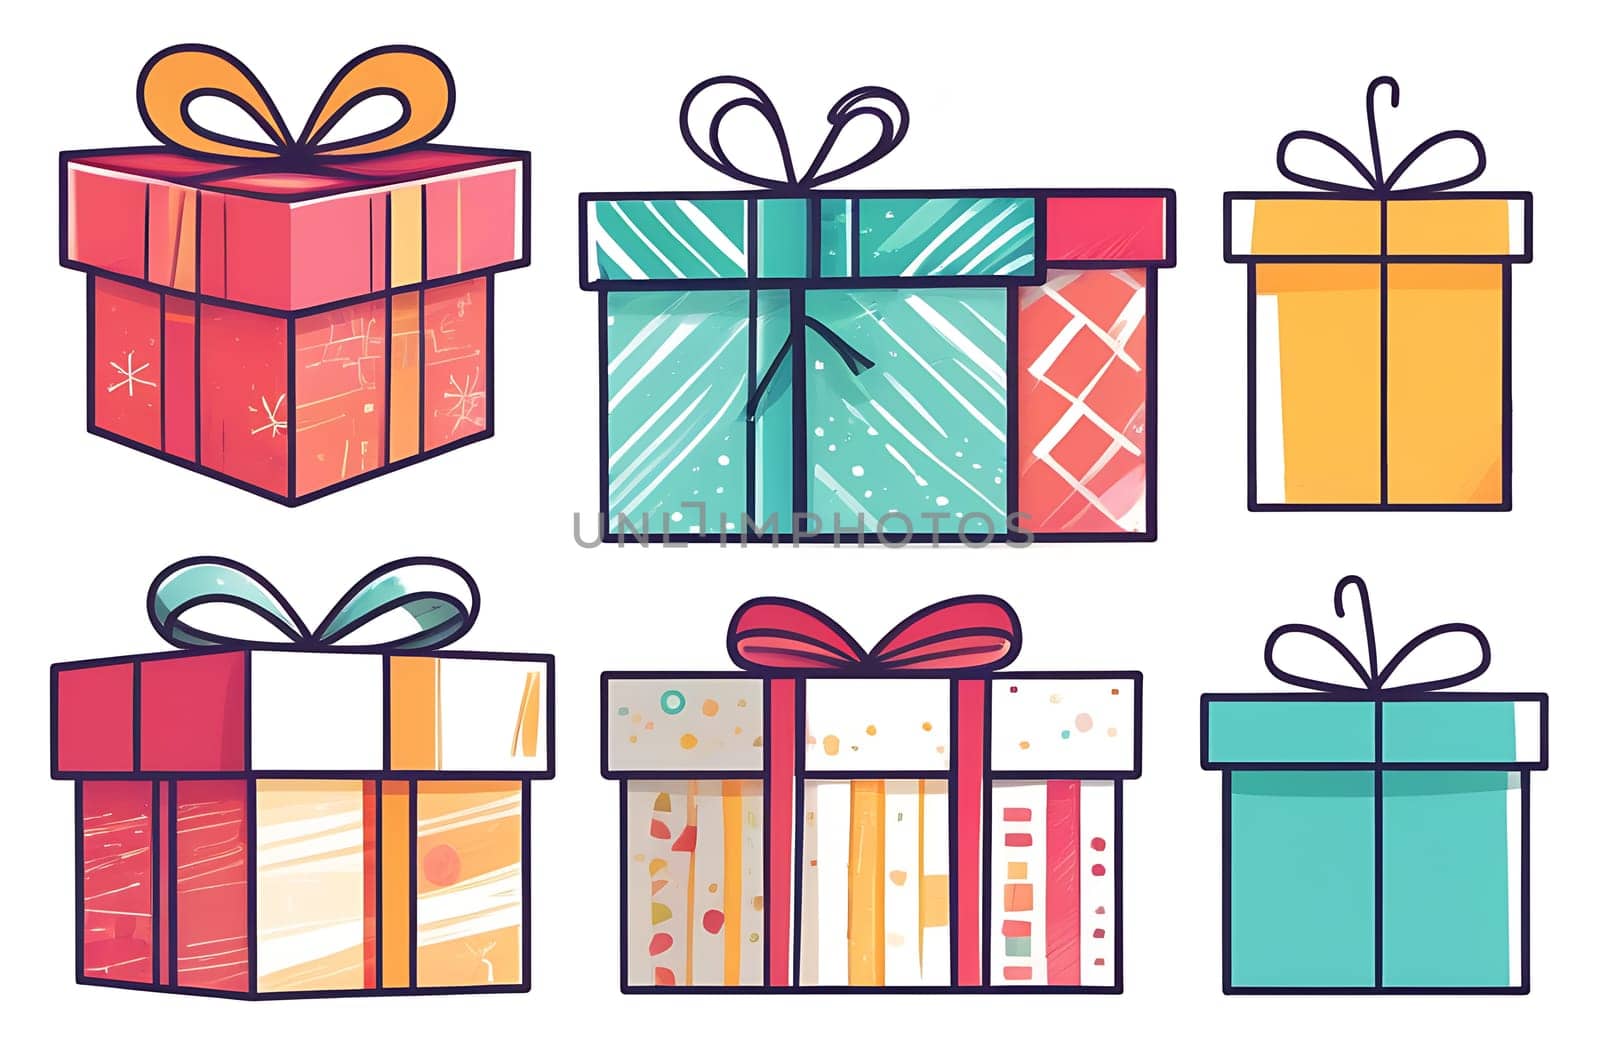 A set of illustrations of gift boxes isolated on a white background.